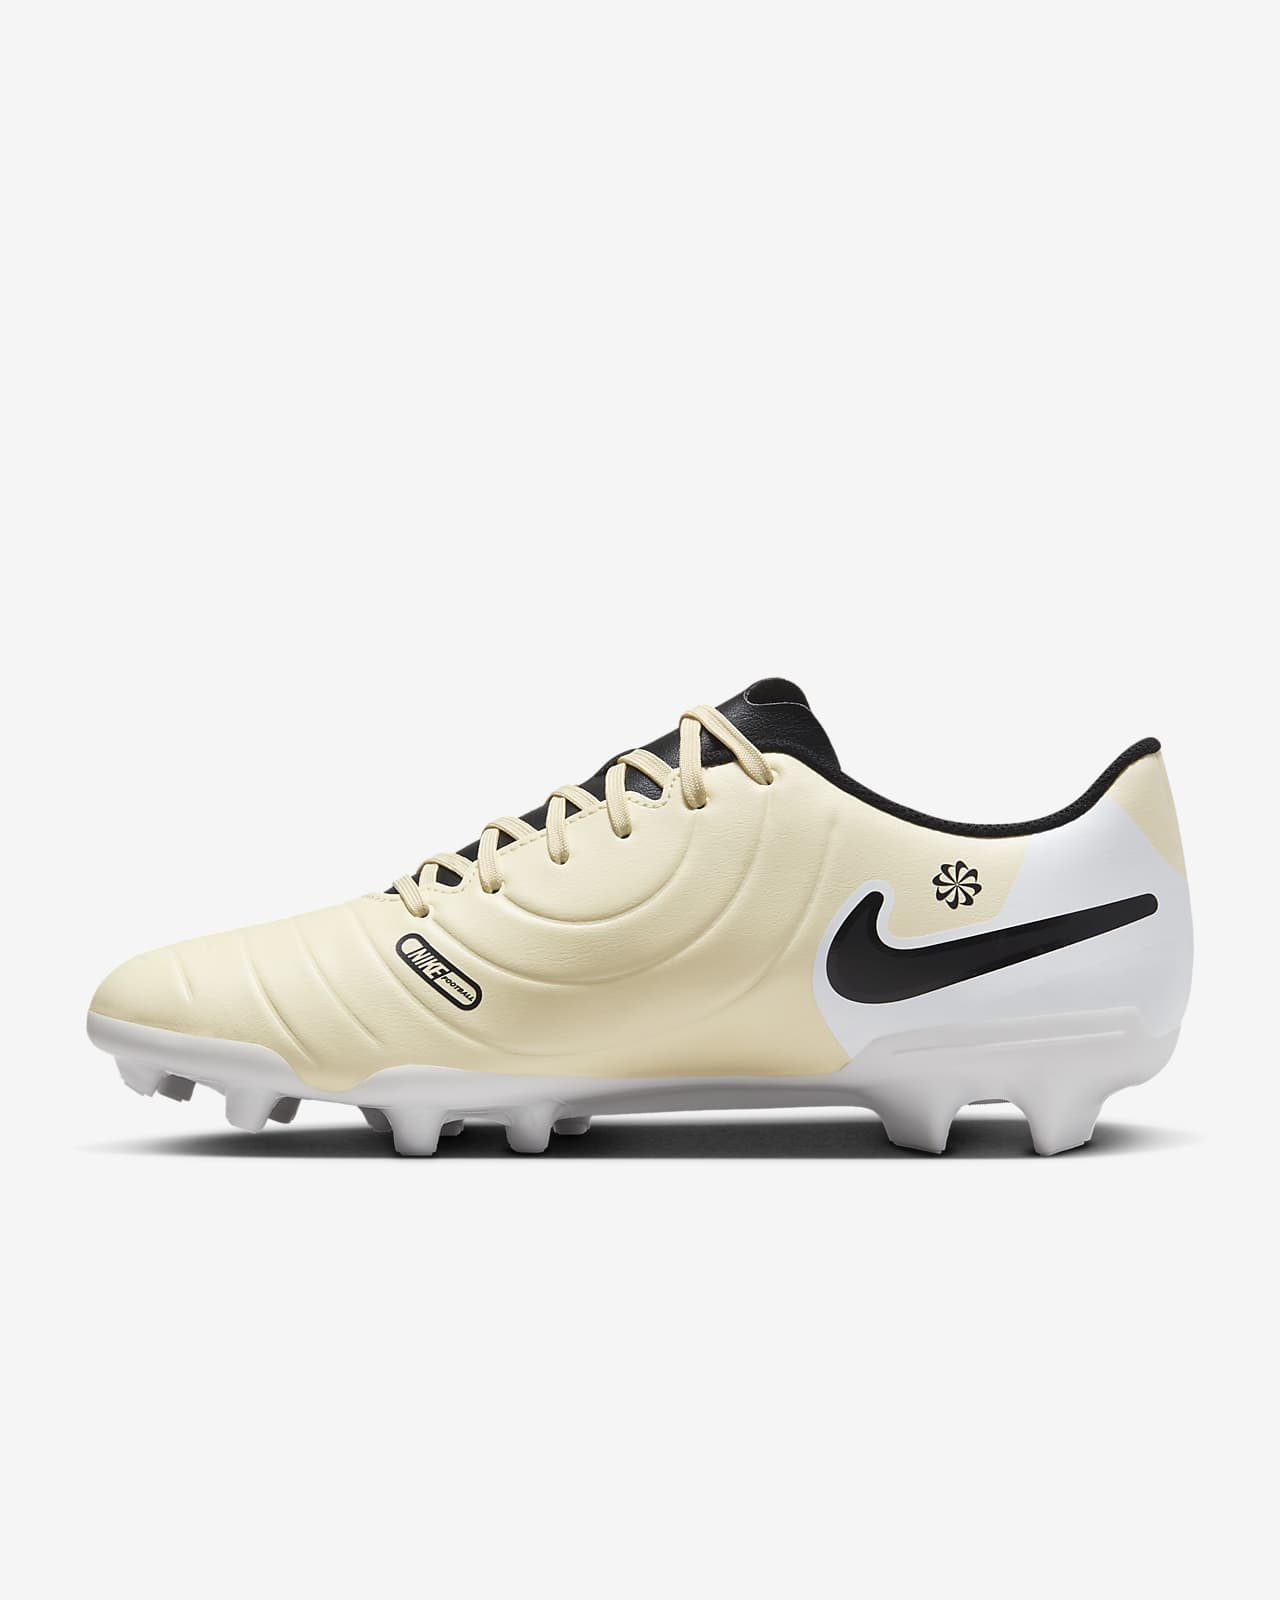 Nike Tiempo Legend 10 Club Multi-Ground Low-Top Soccer Cleats